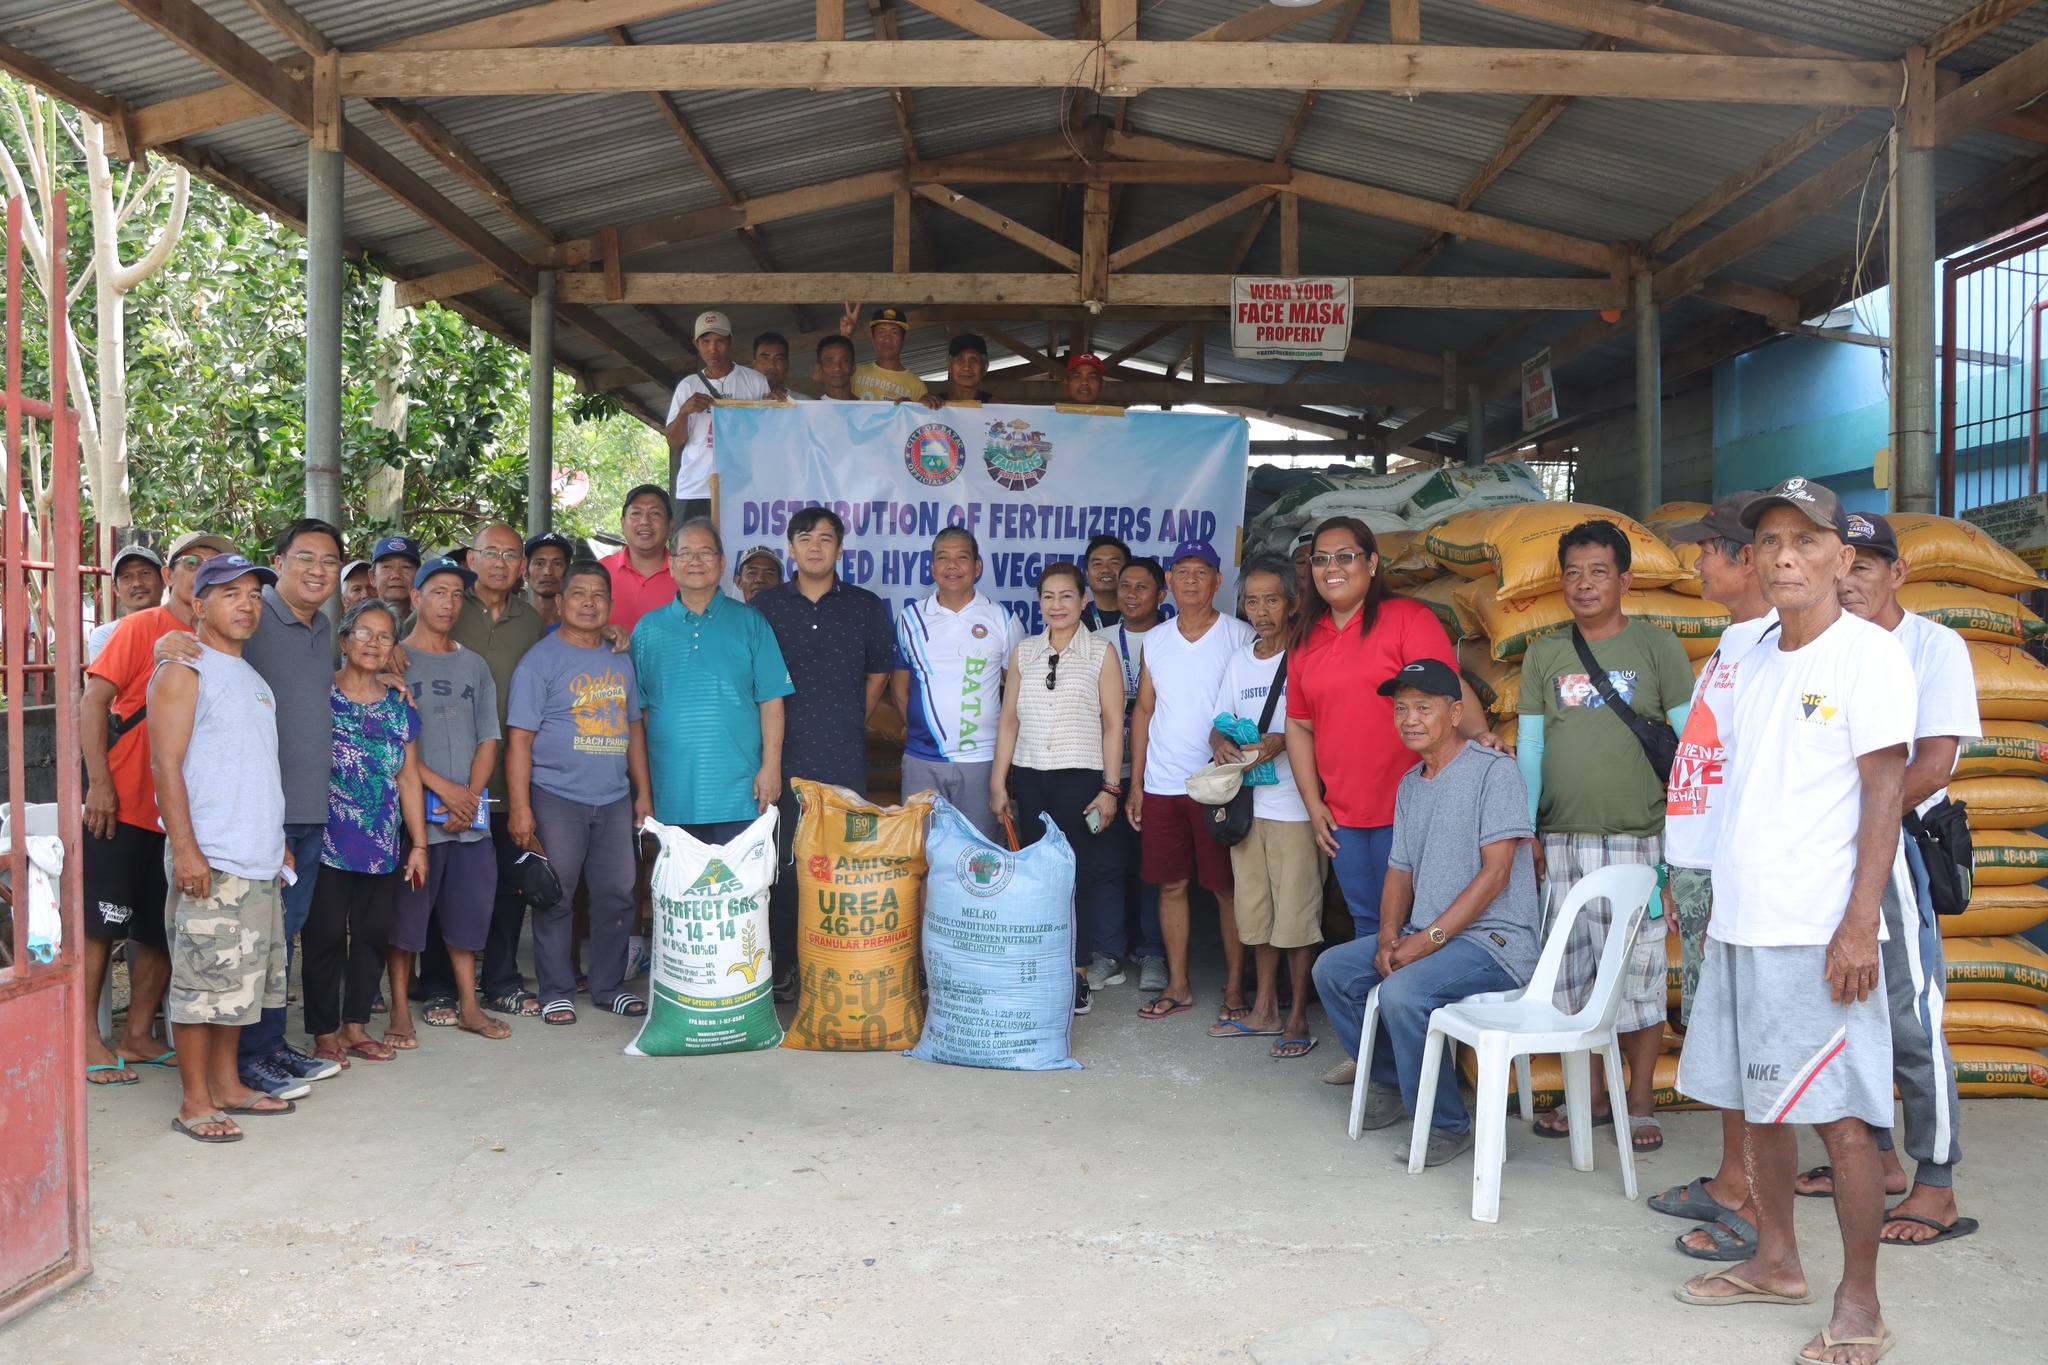 OVER 6,400 FARMERS RECEIVE FREE FERTIIZERS FROM THE CITY GOVERNMENT OF BATAC